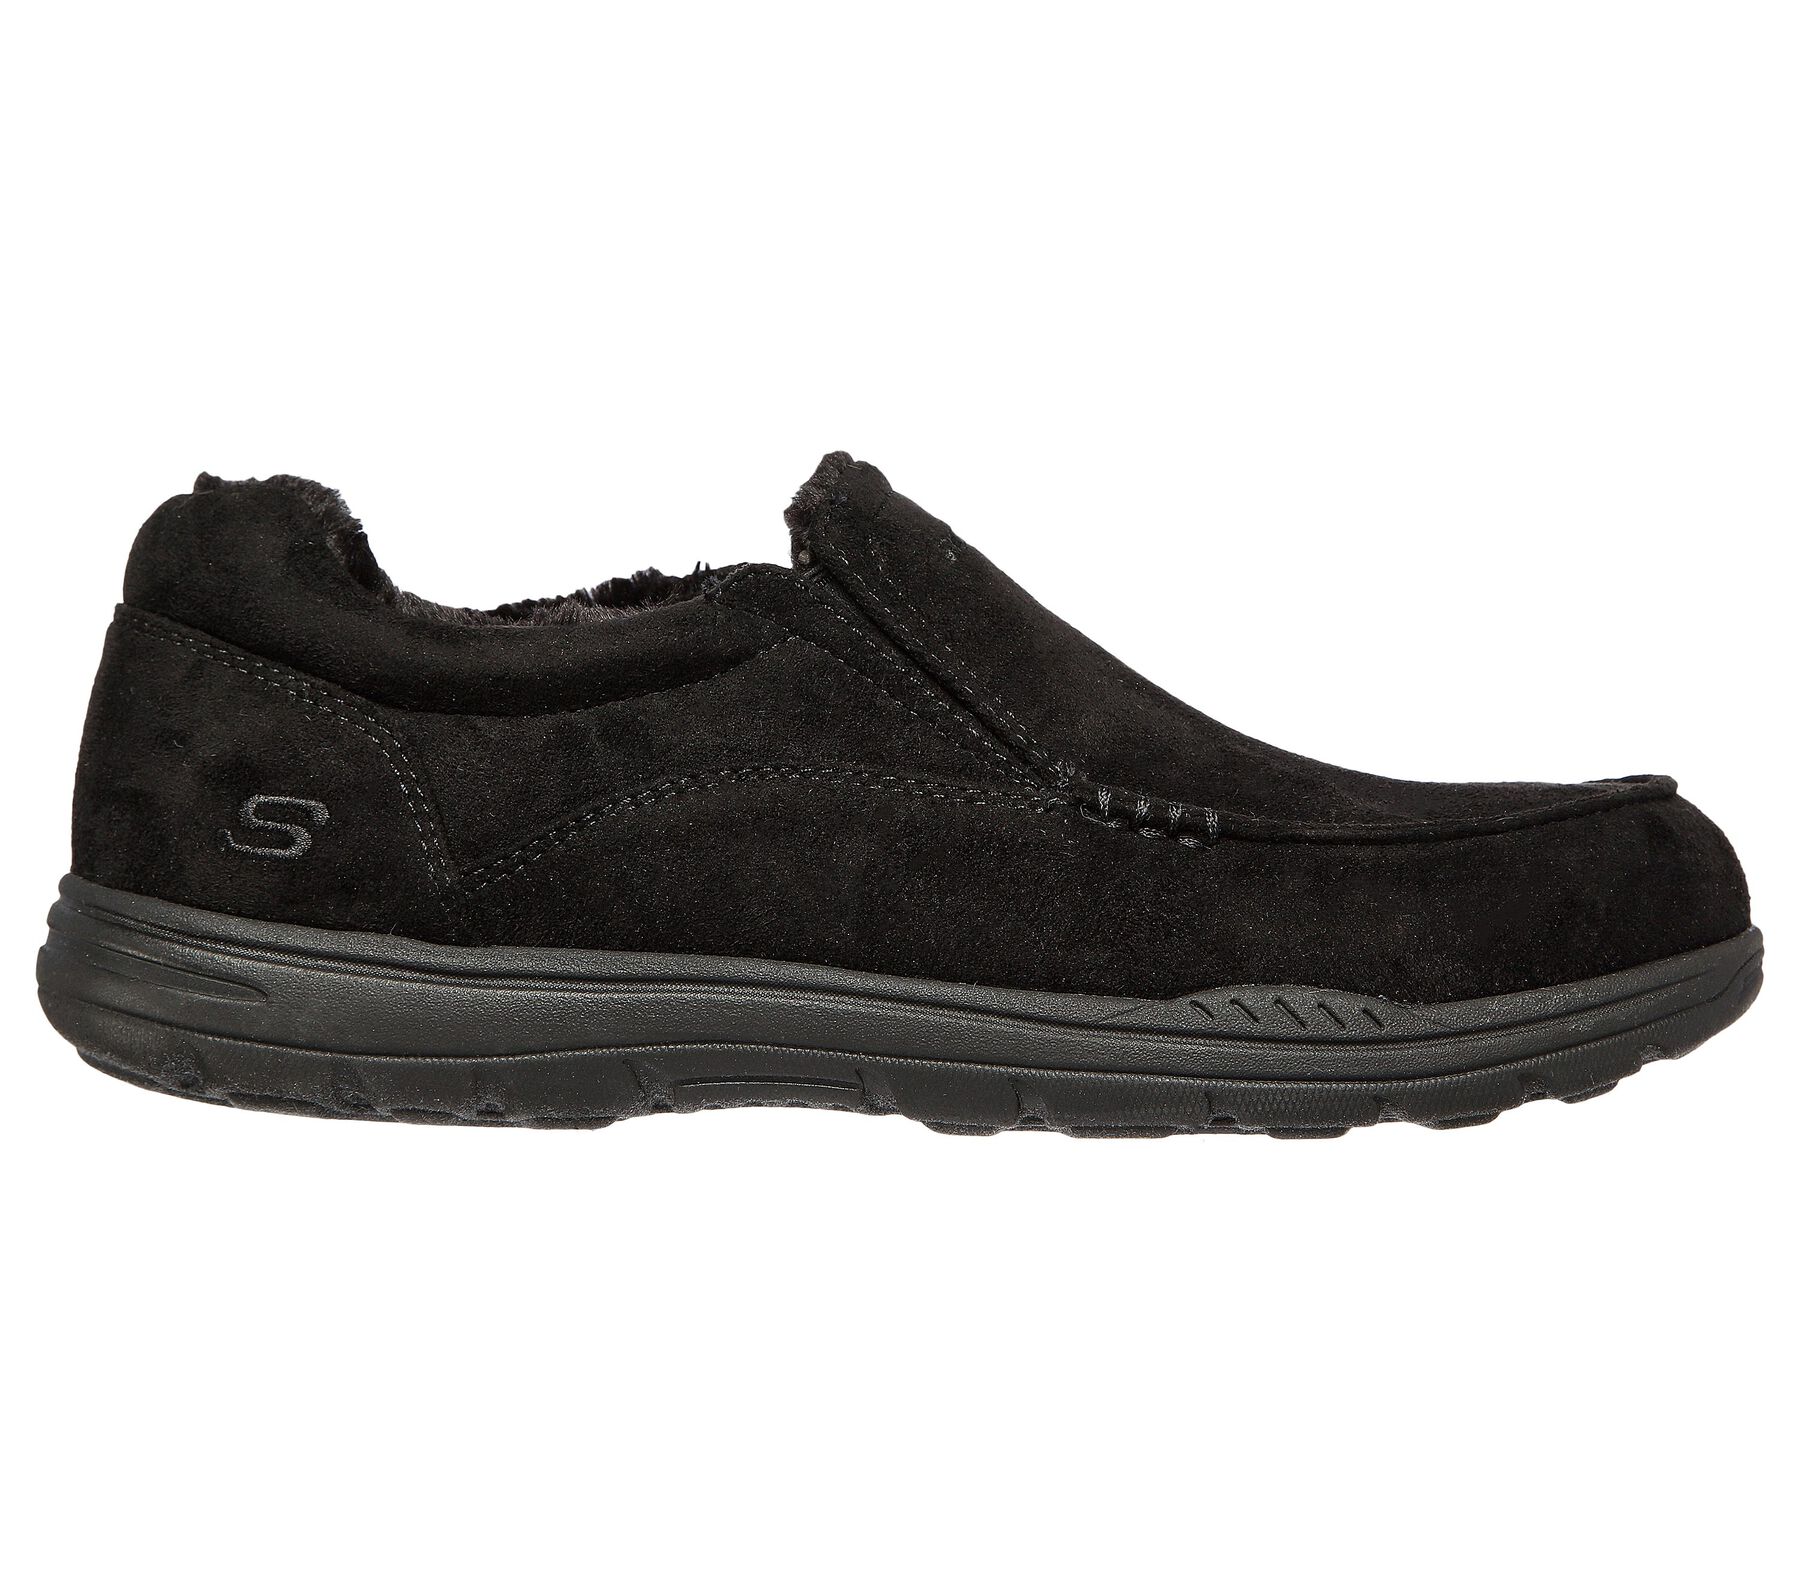 Shop the Relaxed Fit: Expected X - Larmen | SKECHERS